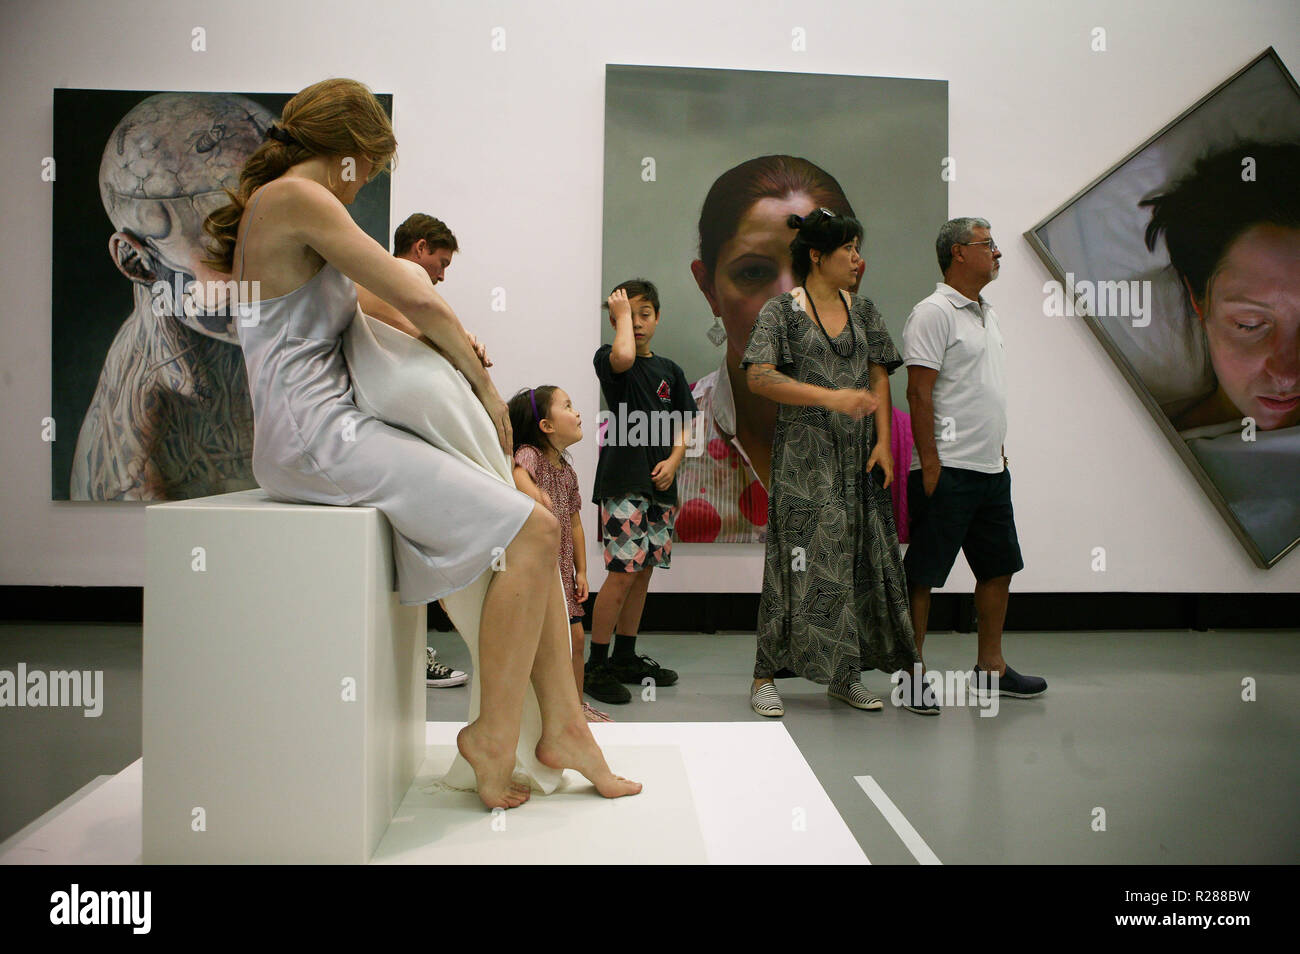 São Paulo, Brazil. 17th November 2018. Movement of visitors at the exhibition 50 Years of Realism From Photorealism to Virtual Reality at the Banco do Brasil Cultural Center SÃ£o Paulo. With nearly 100 works by 30 artists from Brazil and abroad, the exhibition has as its starting point reality and its representation through painting, sculpture and virtual reality in the last 50 years. Credit: Dario Oliveira/ZUMA Wire/Alamy Live News Stock Photo